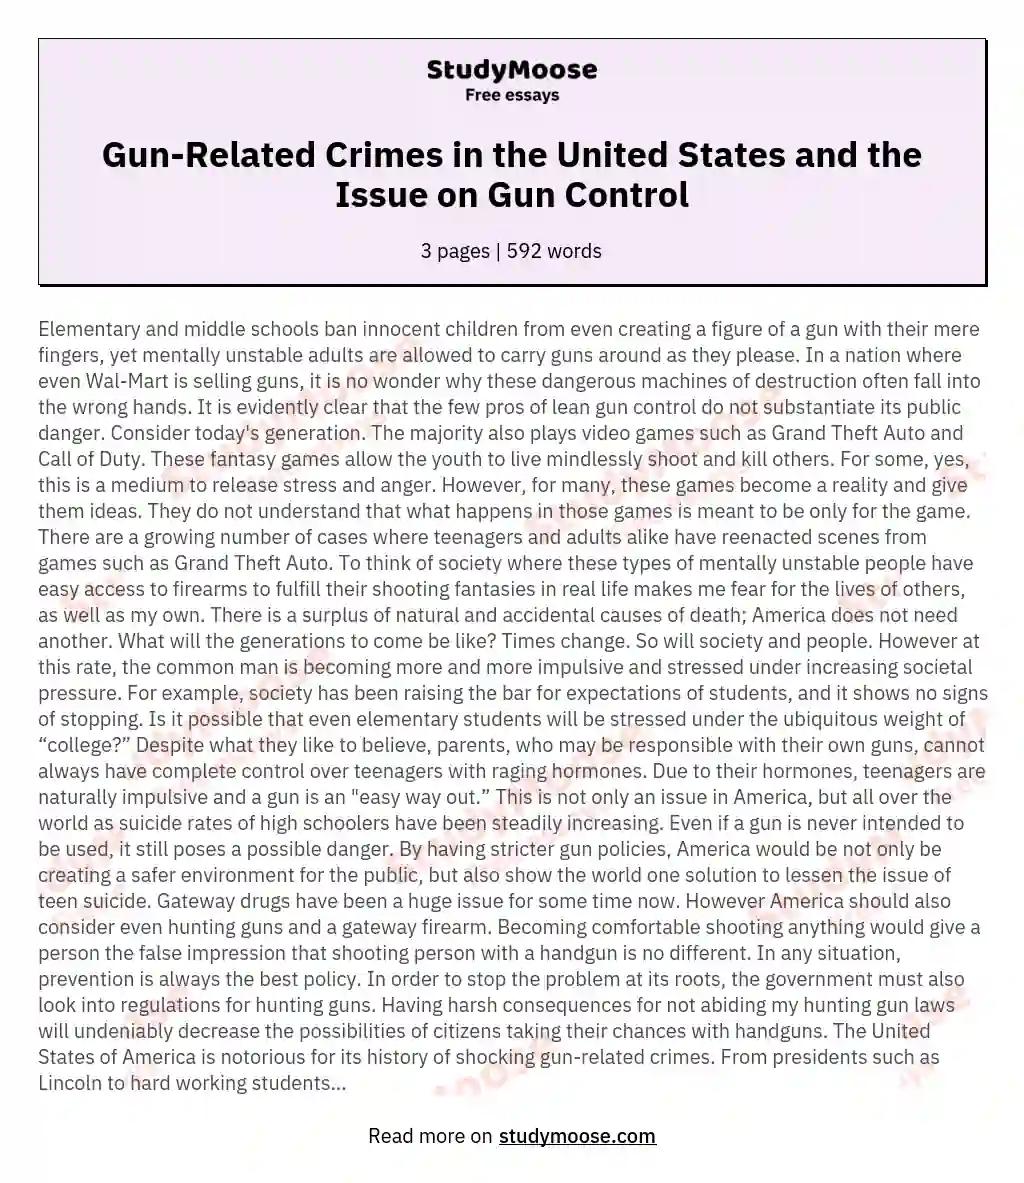 Gun-Related Crimes in the United States and the Issue on Gun Control essay